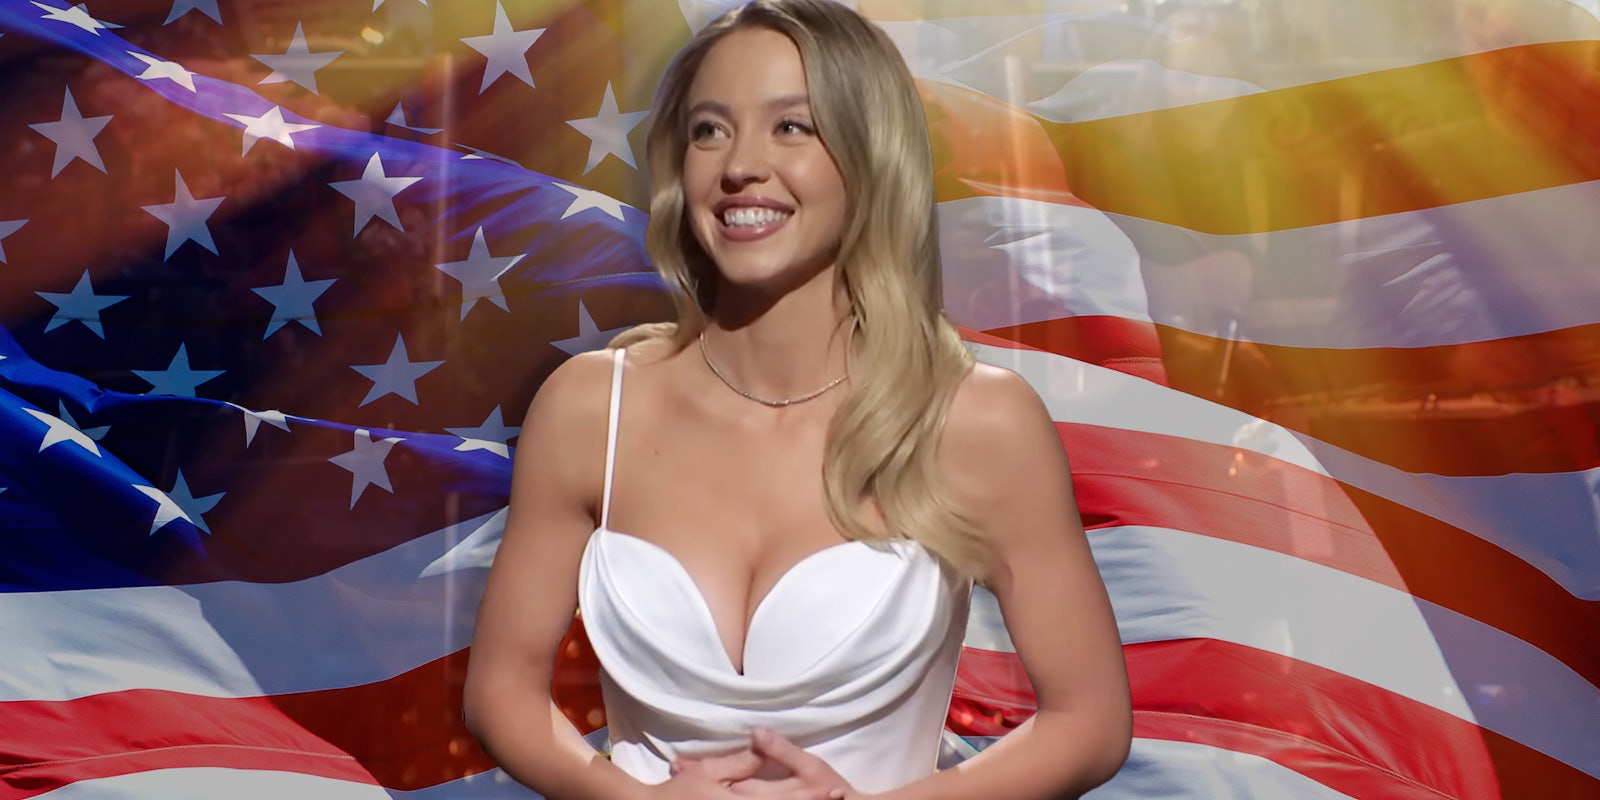 Sydney Sweeney on SNL: Why the far right thinks her boobs ended wokeness.